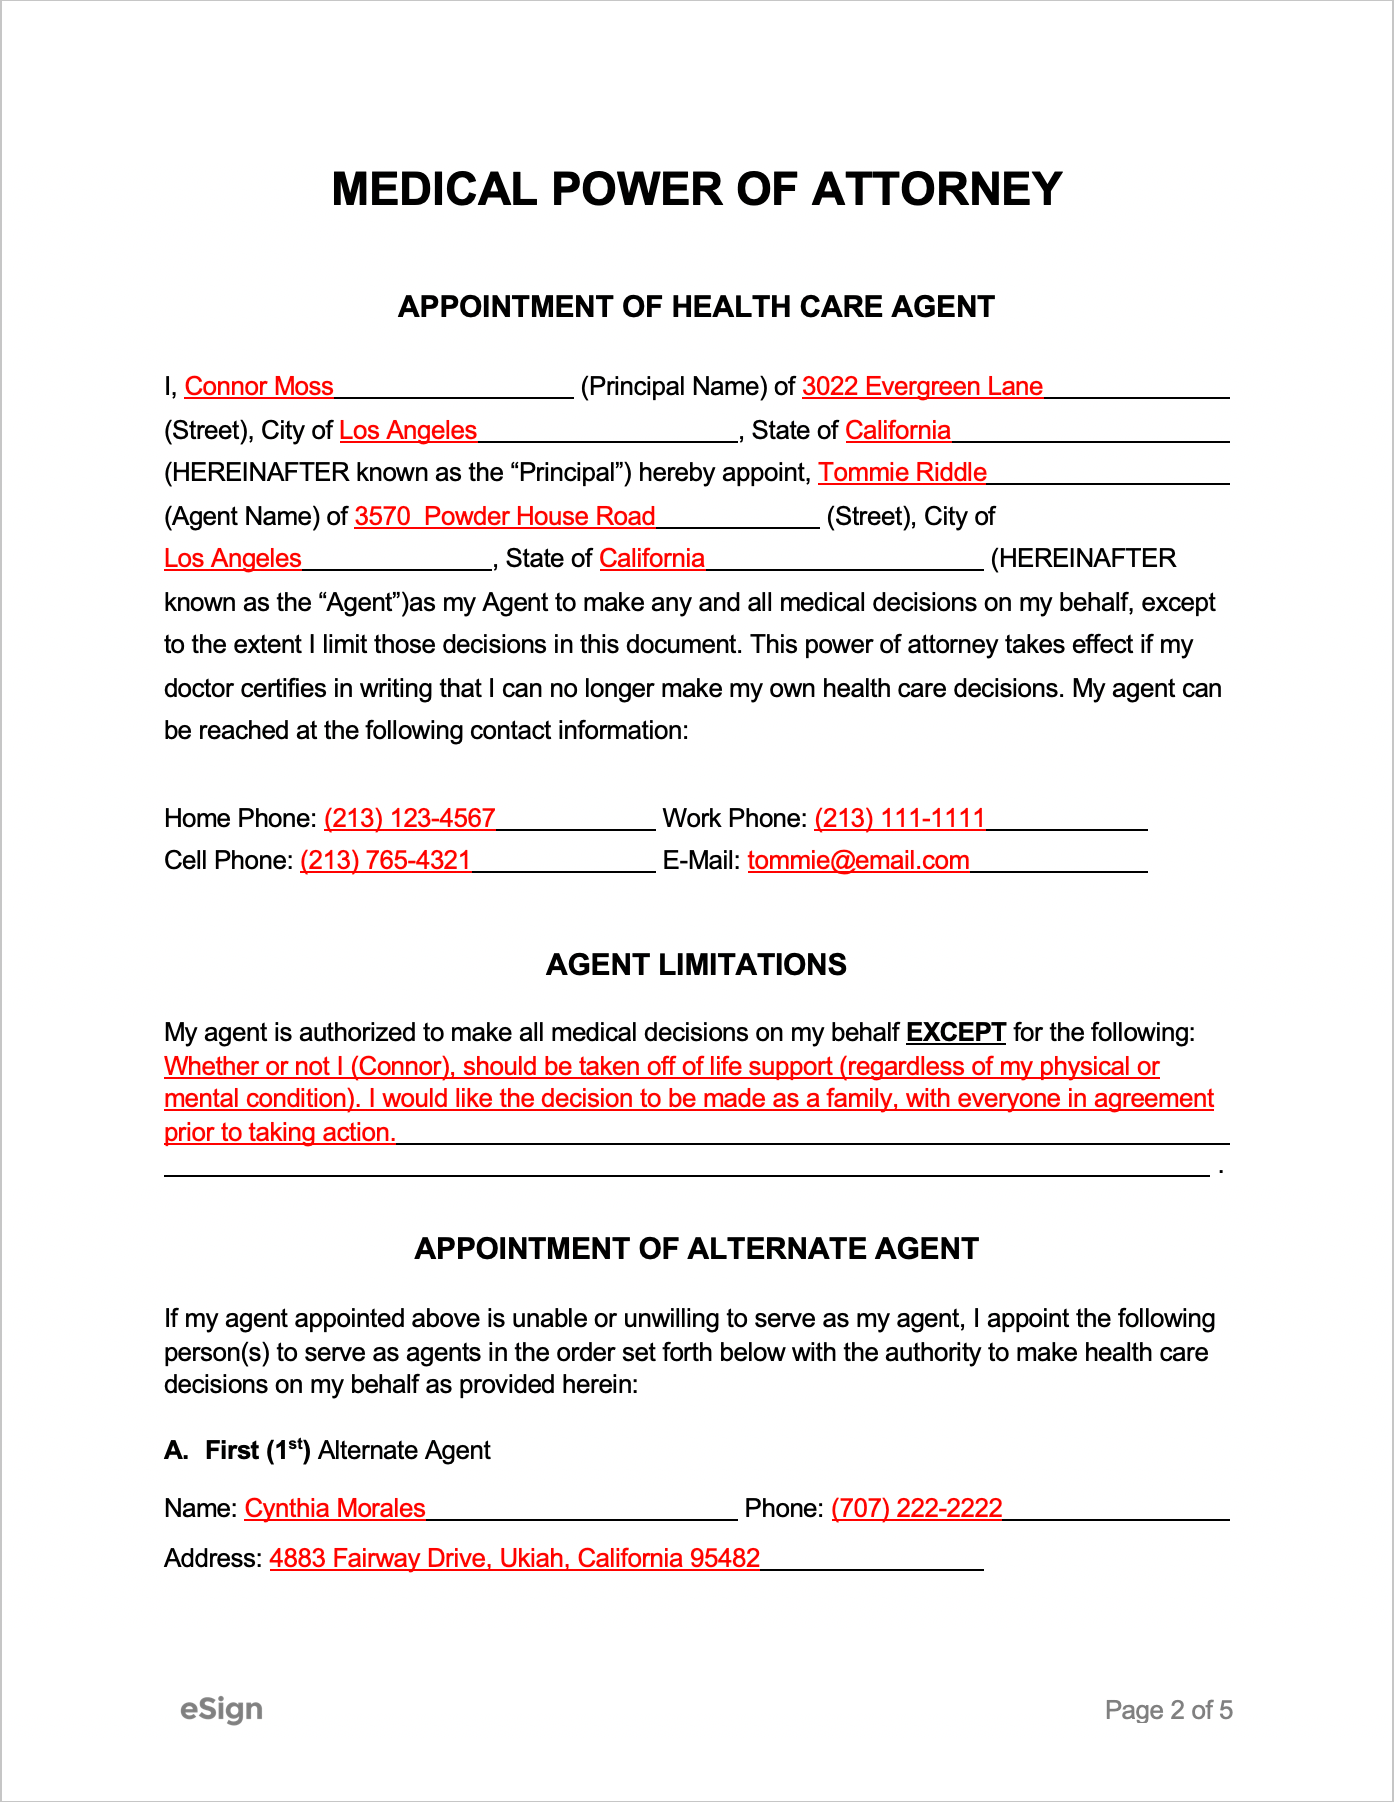 Free Medical Power of Attorney Forms - PDF | Word